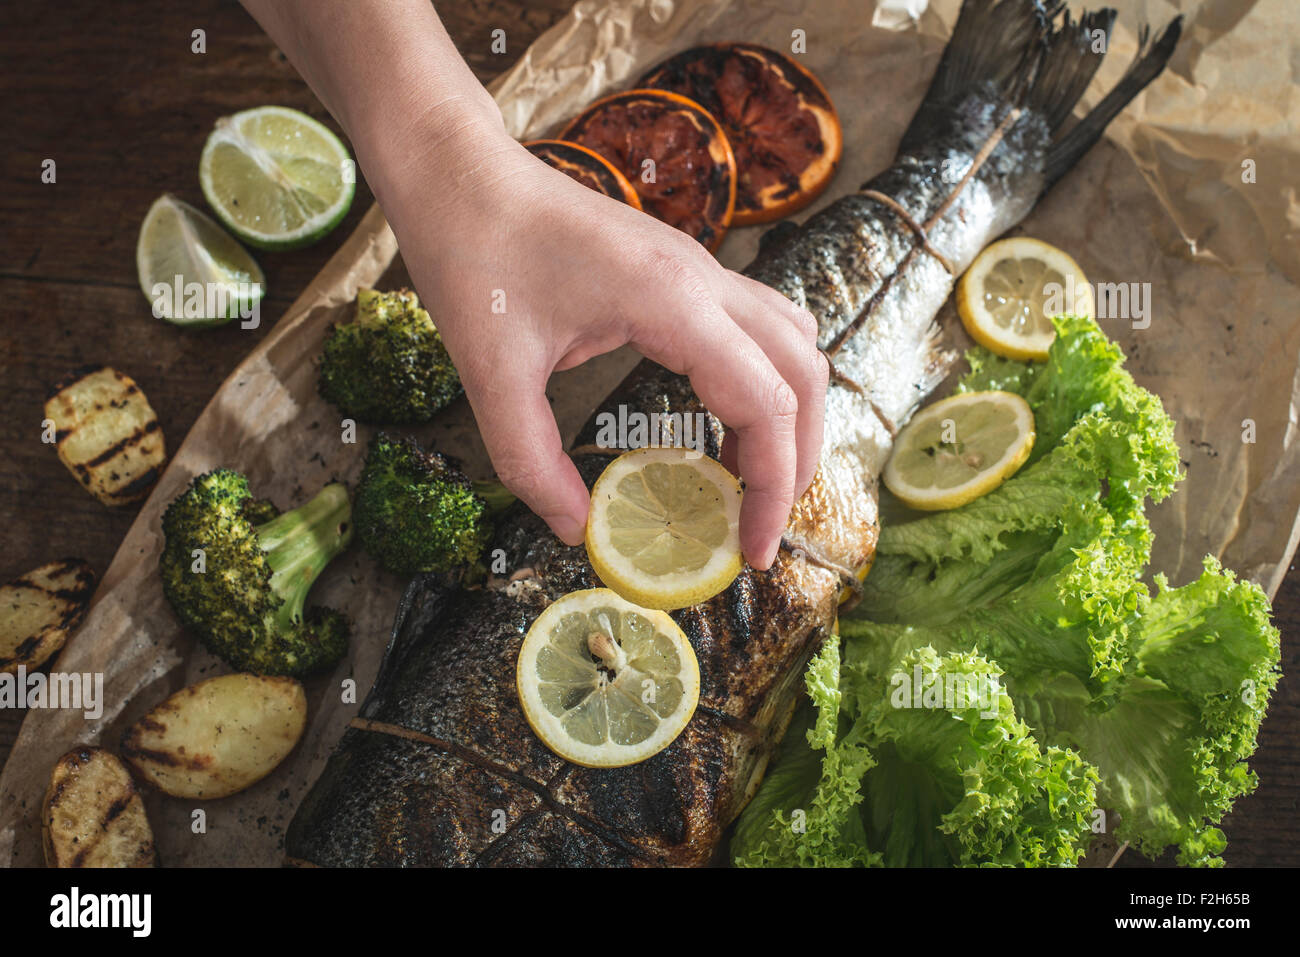 Roasted salmon and vegetables. Hand putting lemon on fish Stock Photo